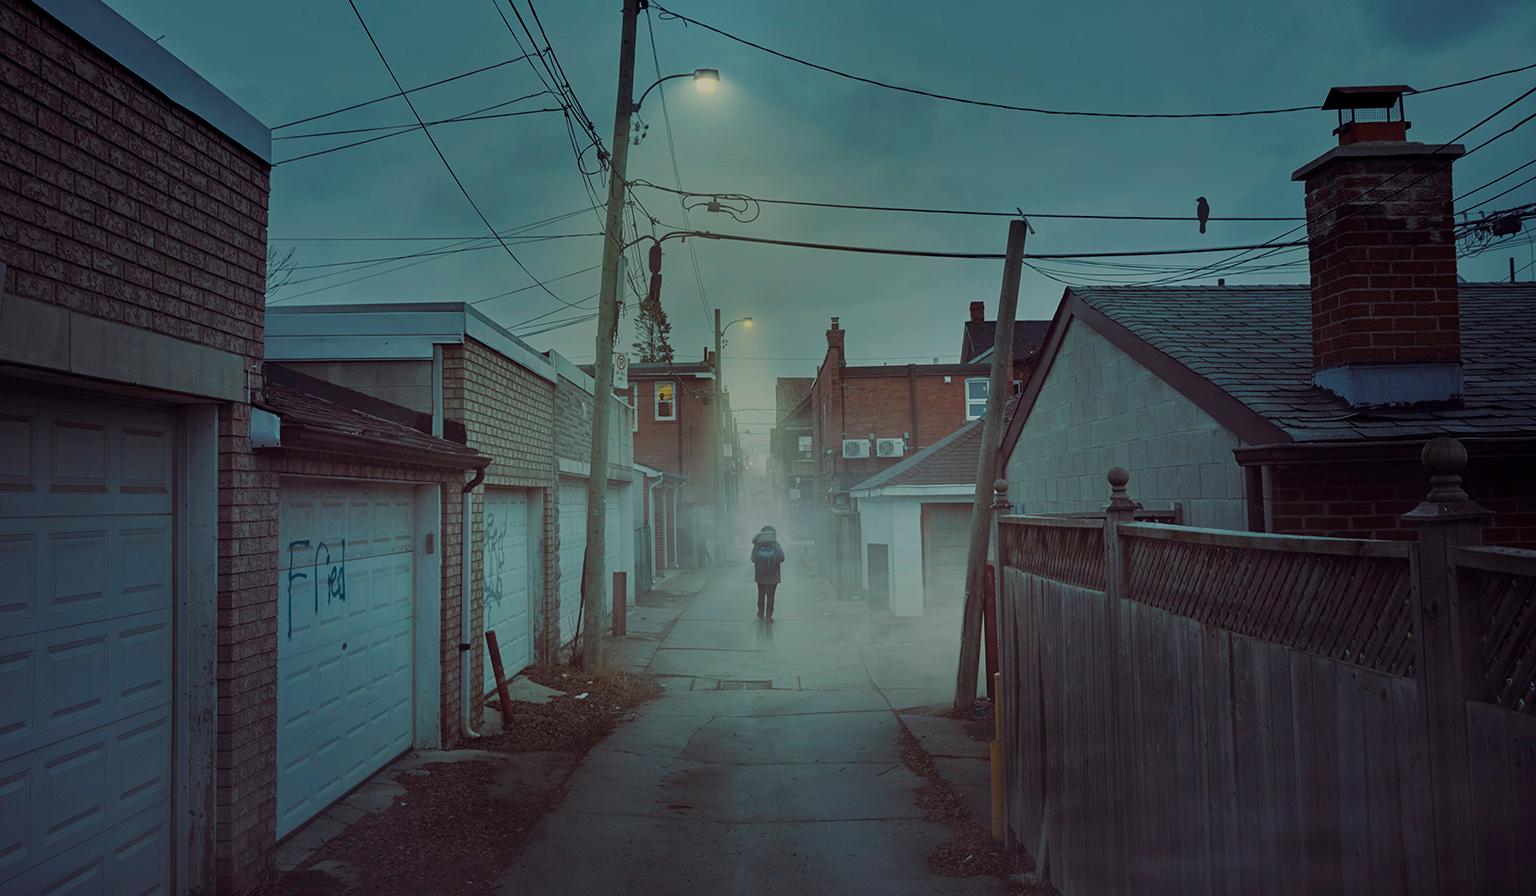 “Alley Walker”, Ontario, Canada, 2018.
Archival Pigment Print, 60”X35”. Edition of 7.
Signed, Dated and Numbered on the Reverse.

Tyler Gray’s photographs are cinematic in their storytelling. They are those moments that transform and become